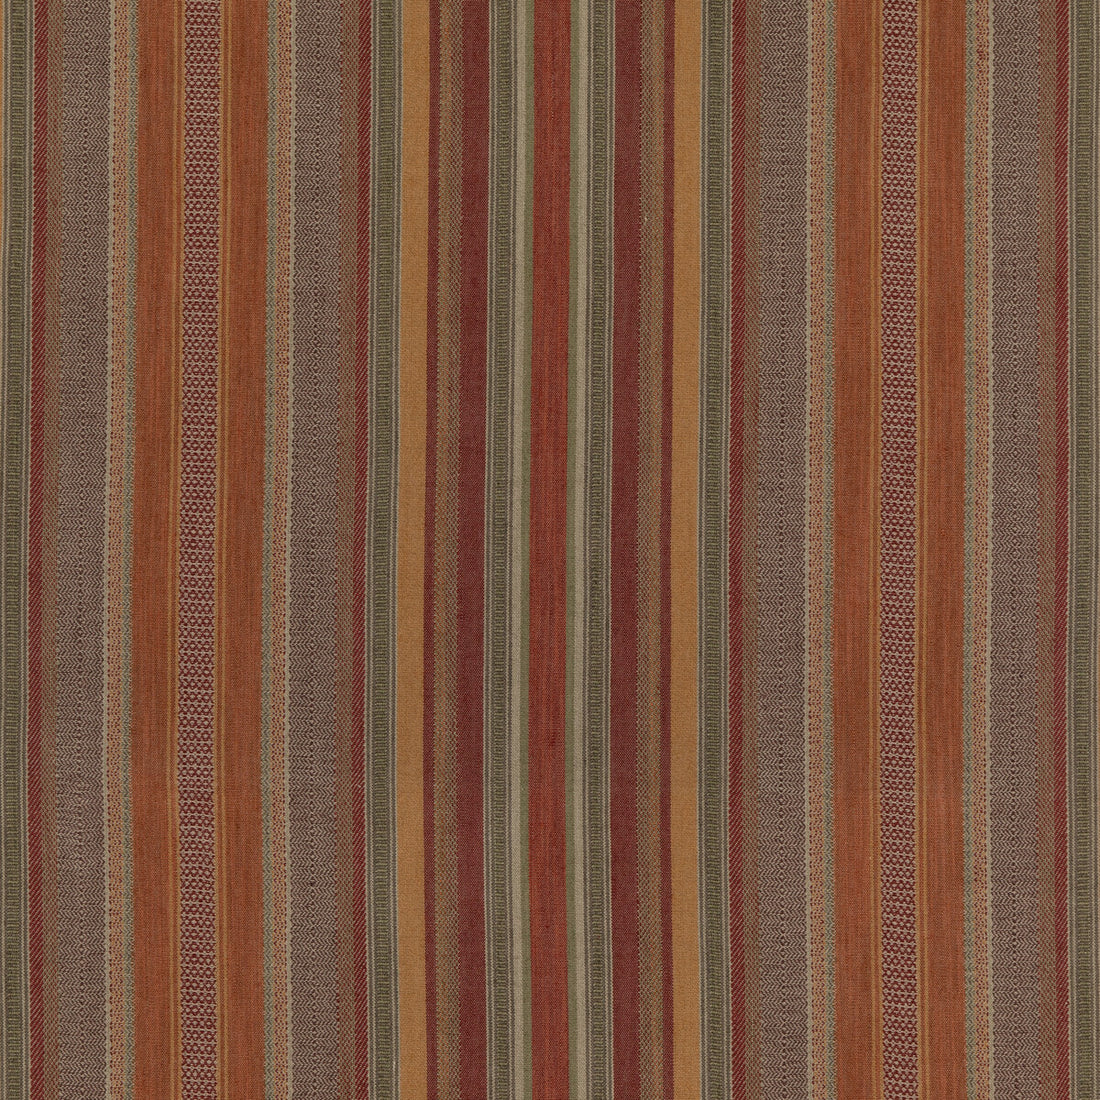 Rustic Stripe fabric in red/plum color - pattern FD784.V54.0 - by Mulberry in the Modern Country I collection